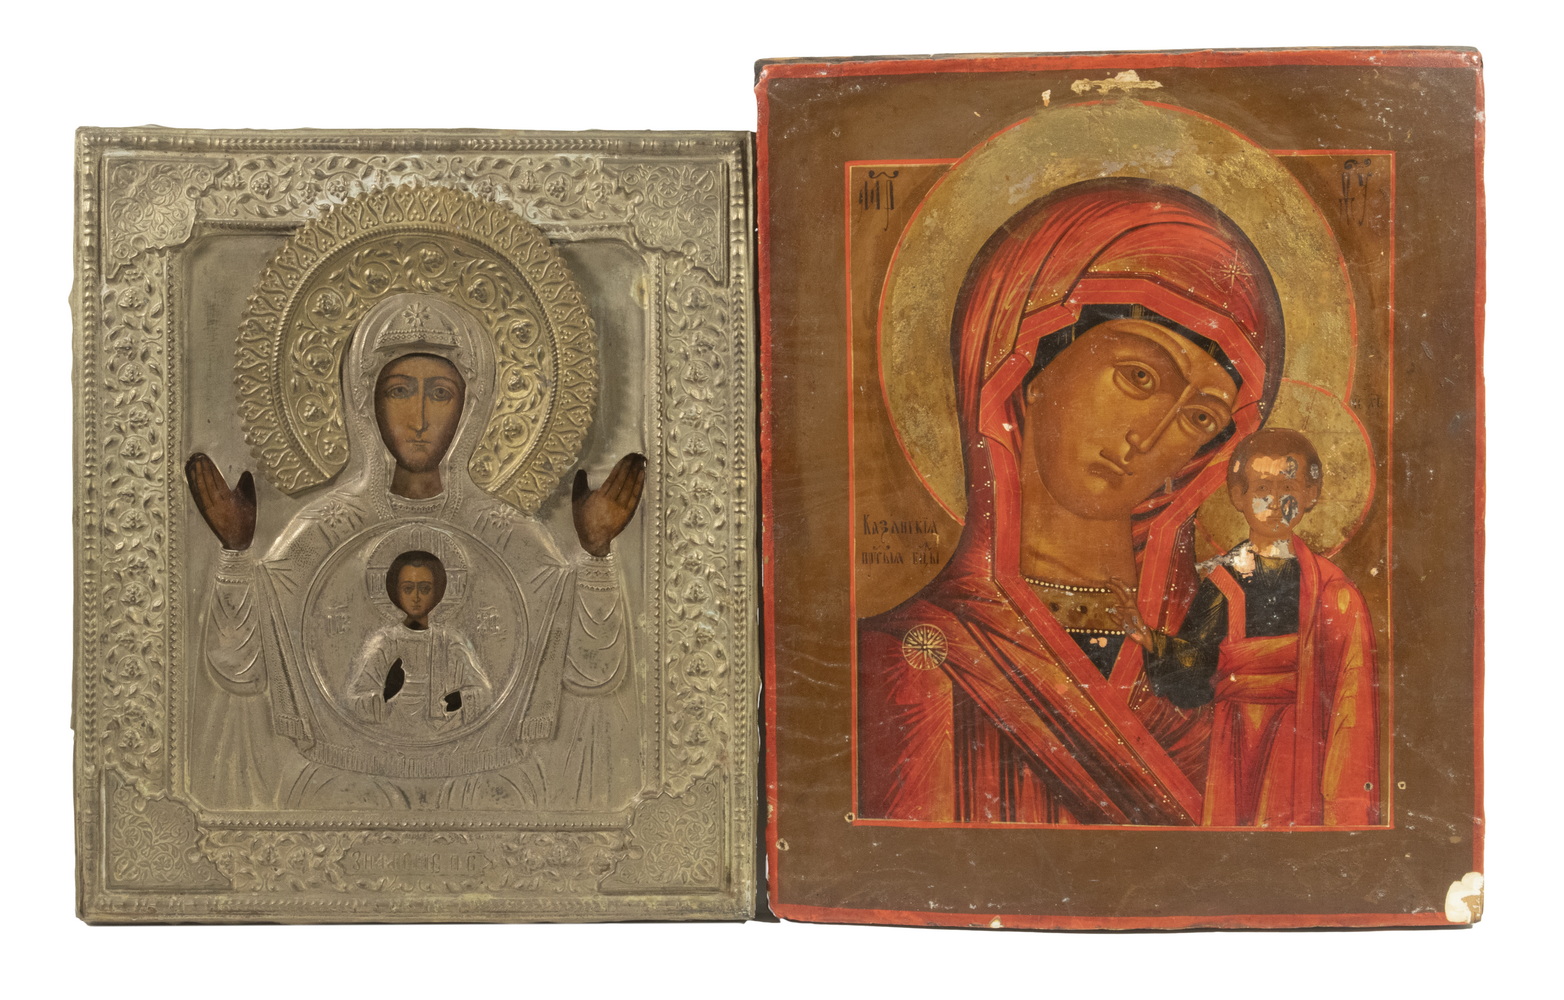  2 19TH C RUSSIAN ICONS OF MADONNA 302f07